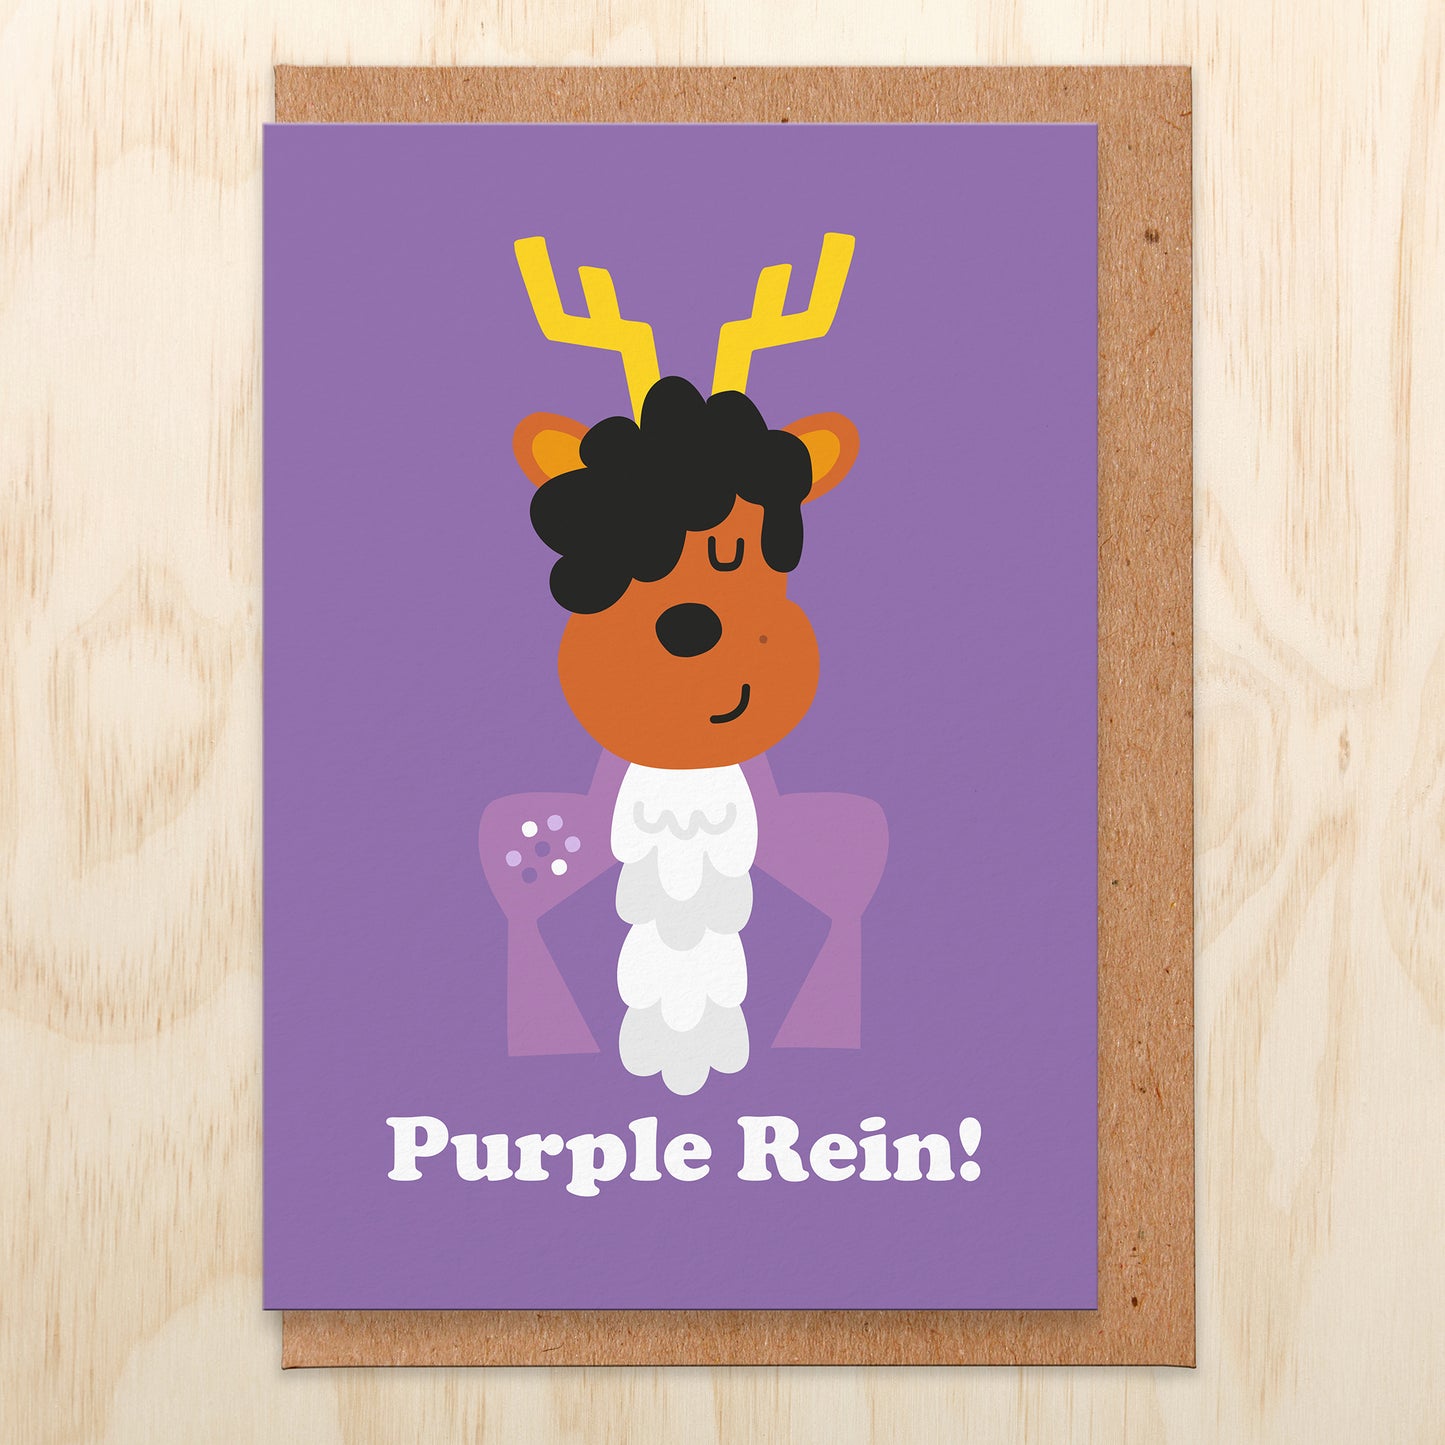 Christmas card with an illustration of a reindeer dressed as the purple rain singer. The card reads purple rein!